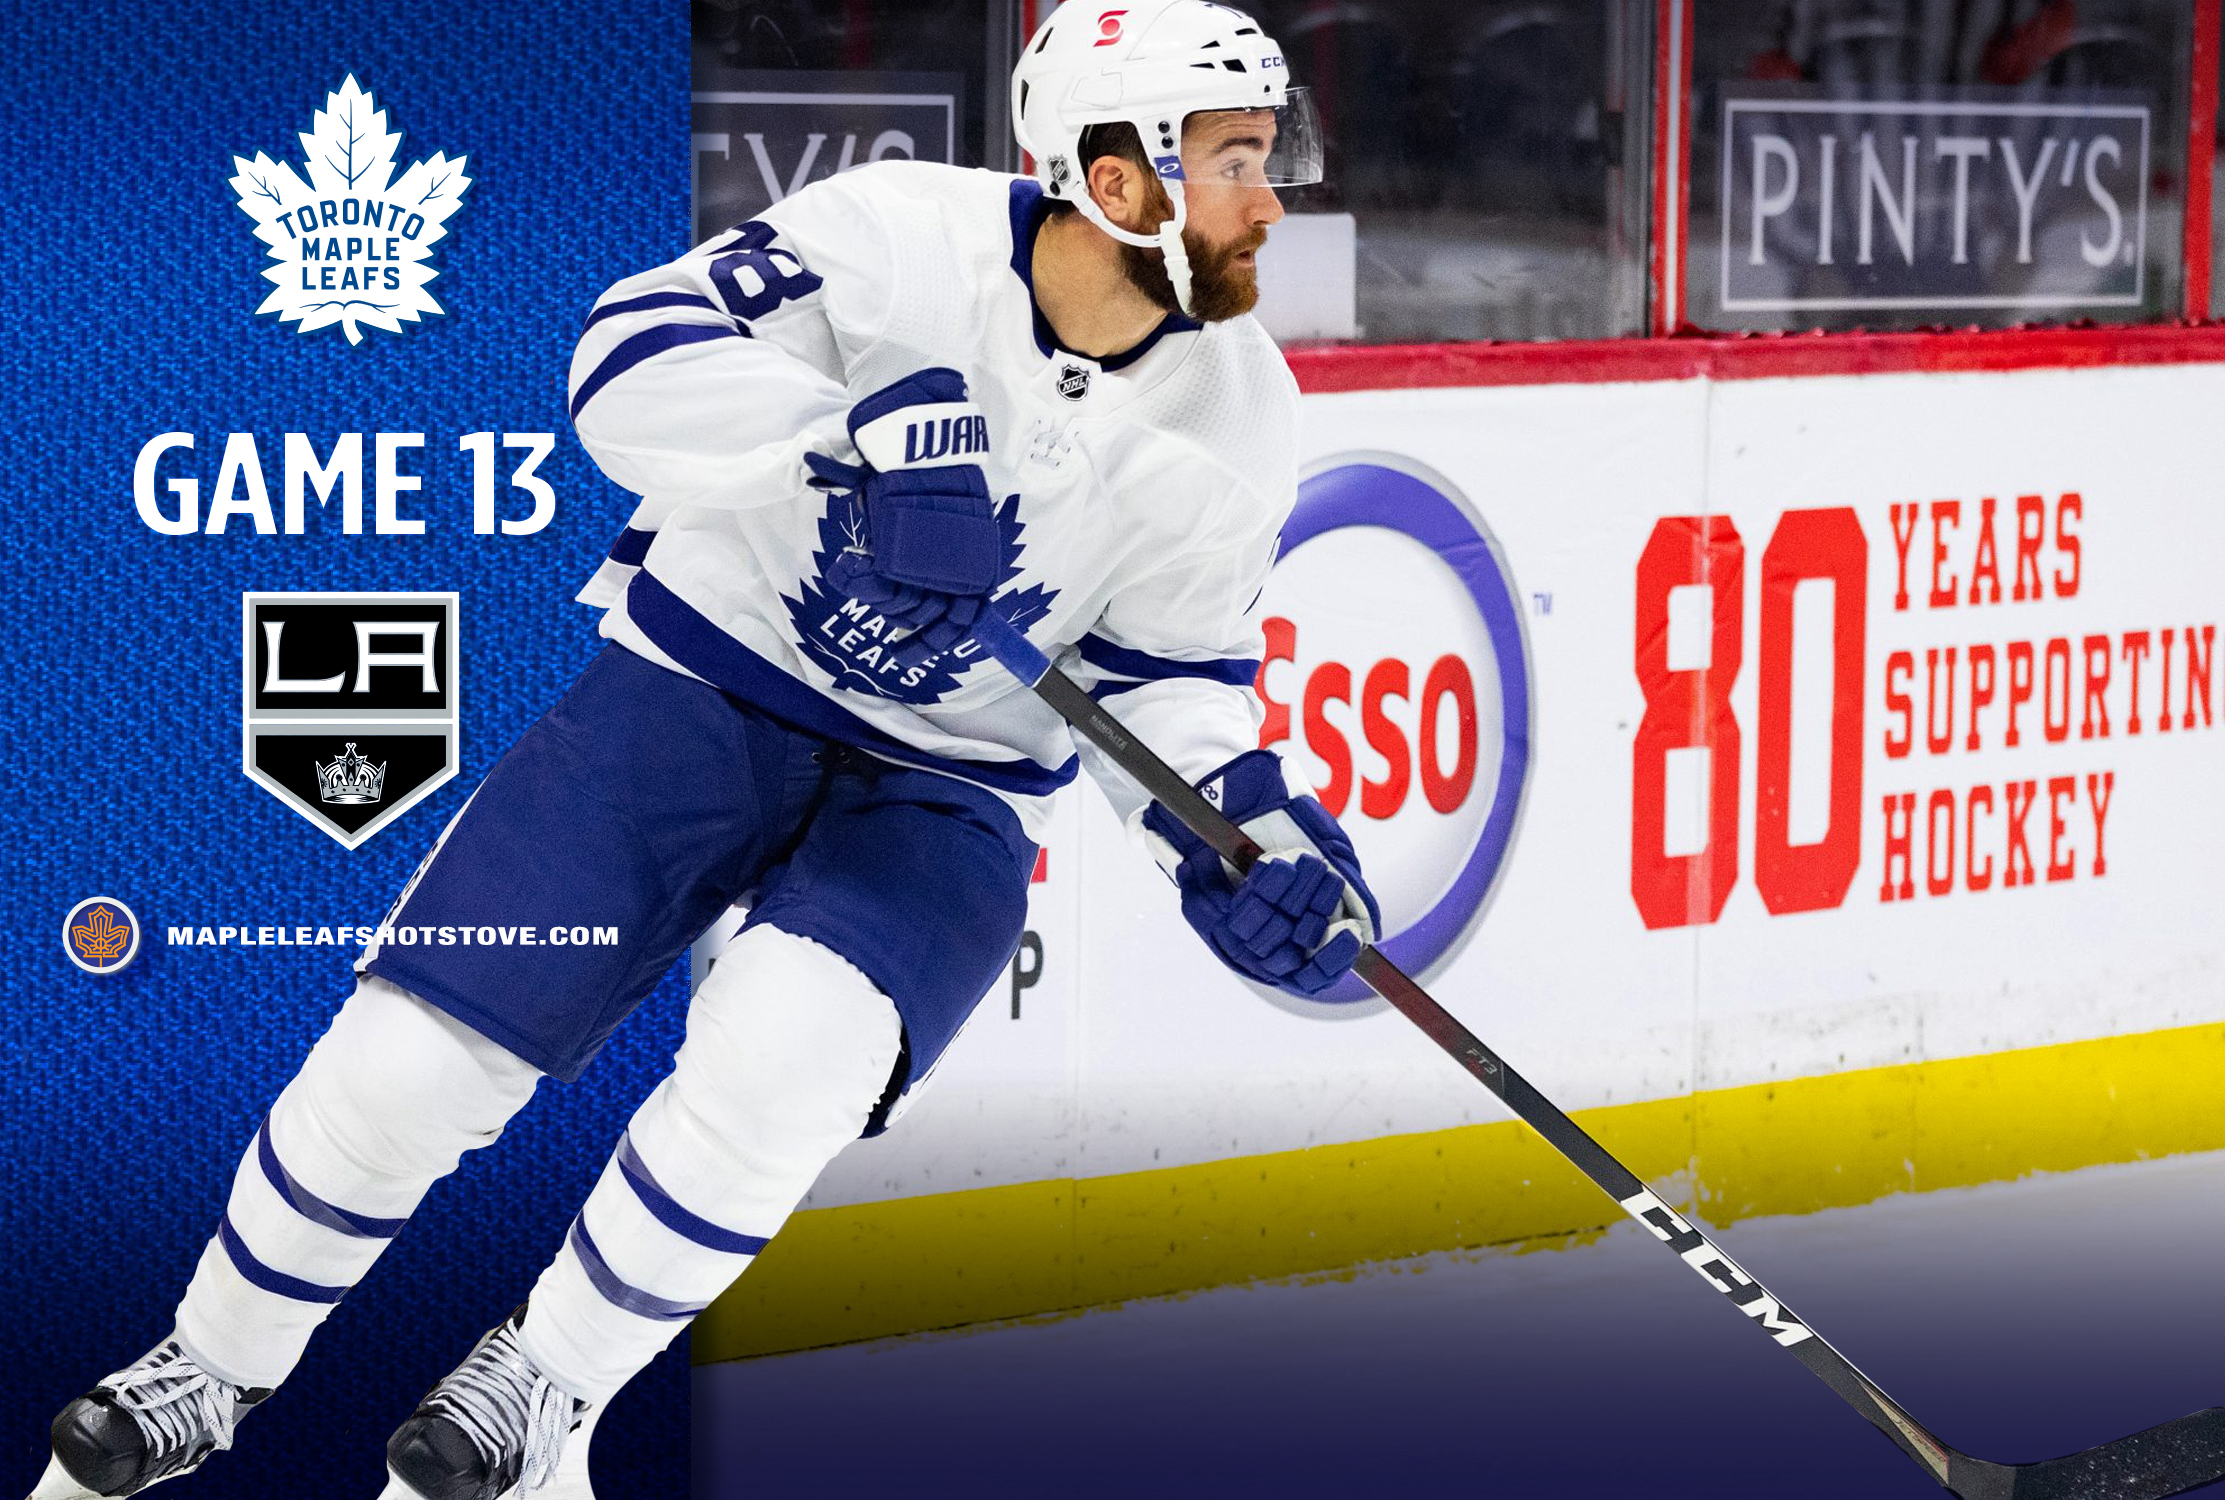 Leafs Game Preview #12: Liljegren Returns